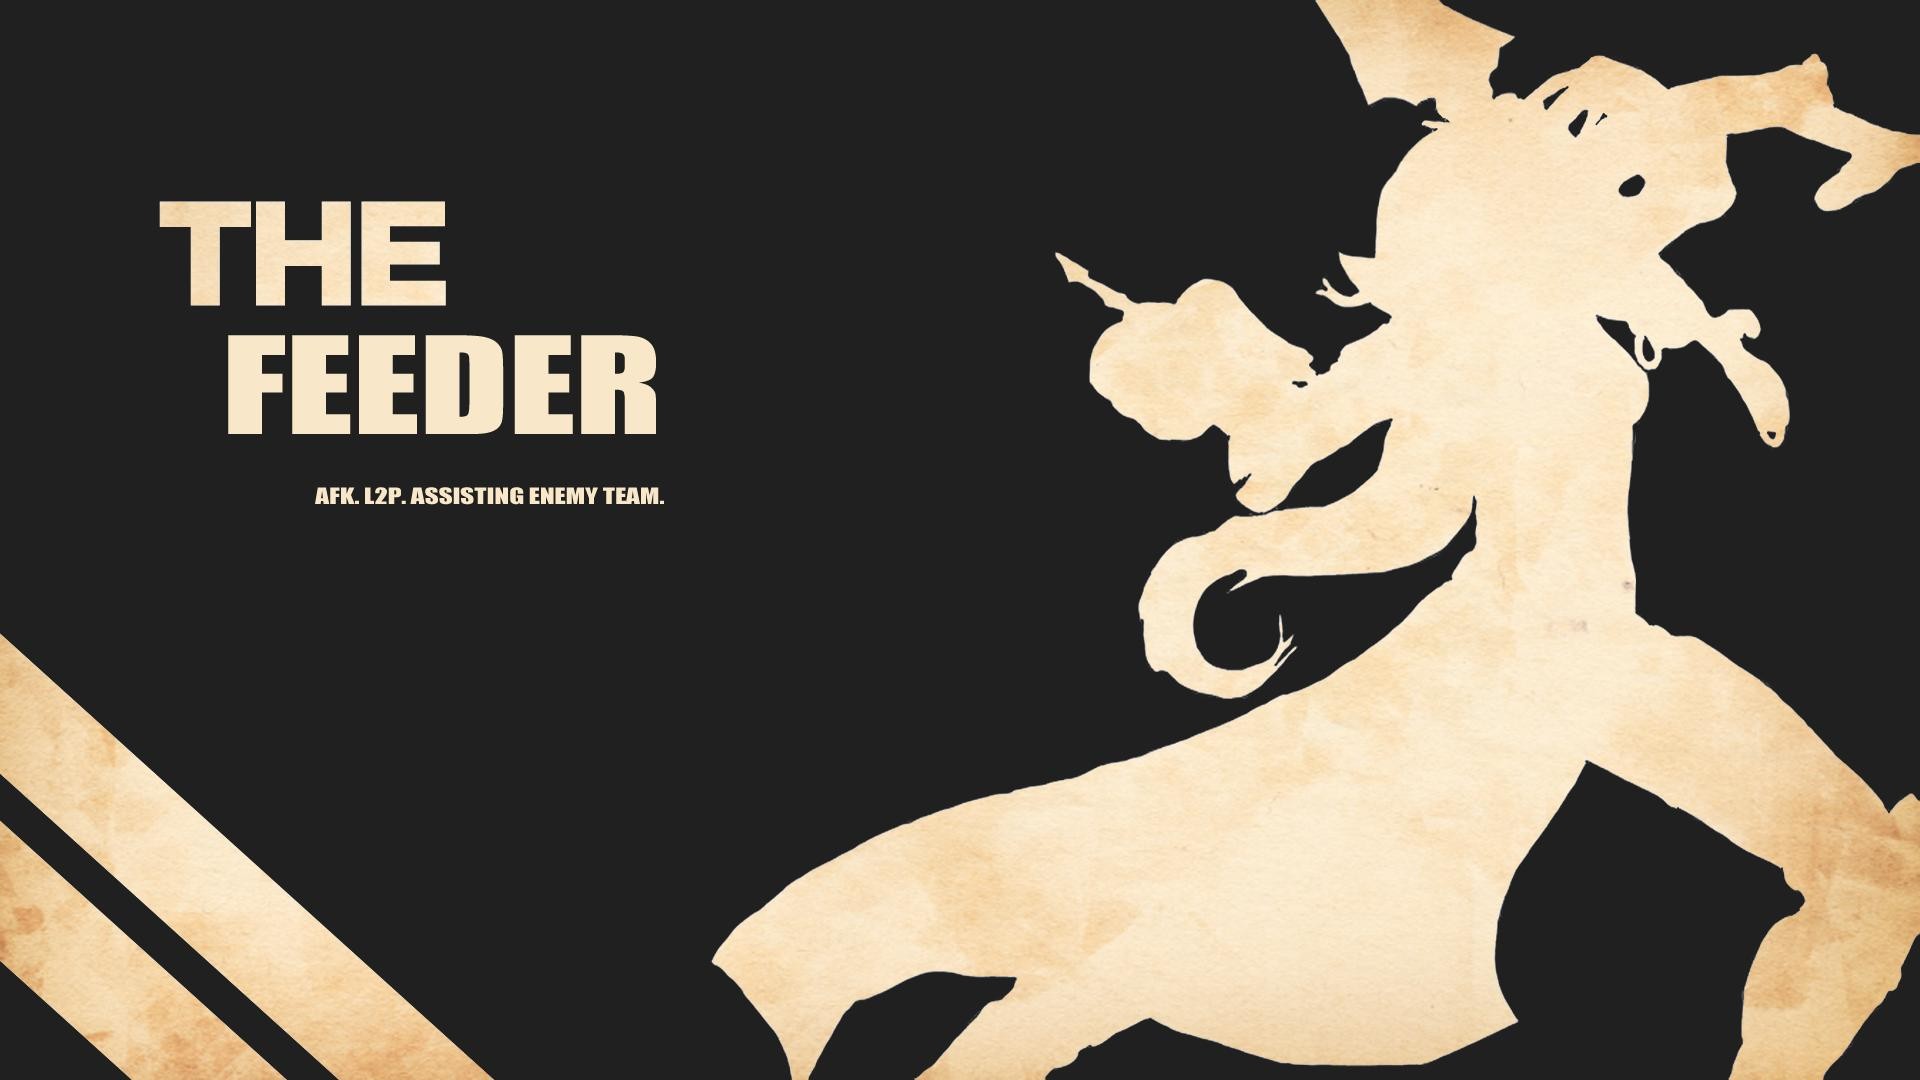 League of Legends Wallpaper – The Feeder The Feeder: AFK. L2P. Assisting  Enemy Team.